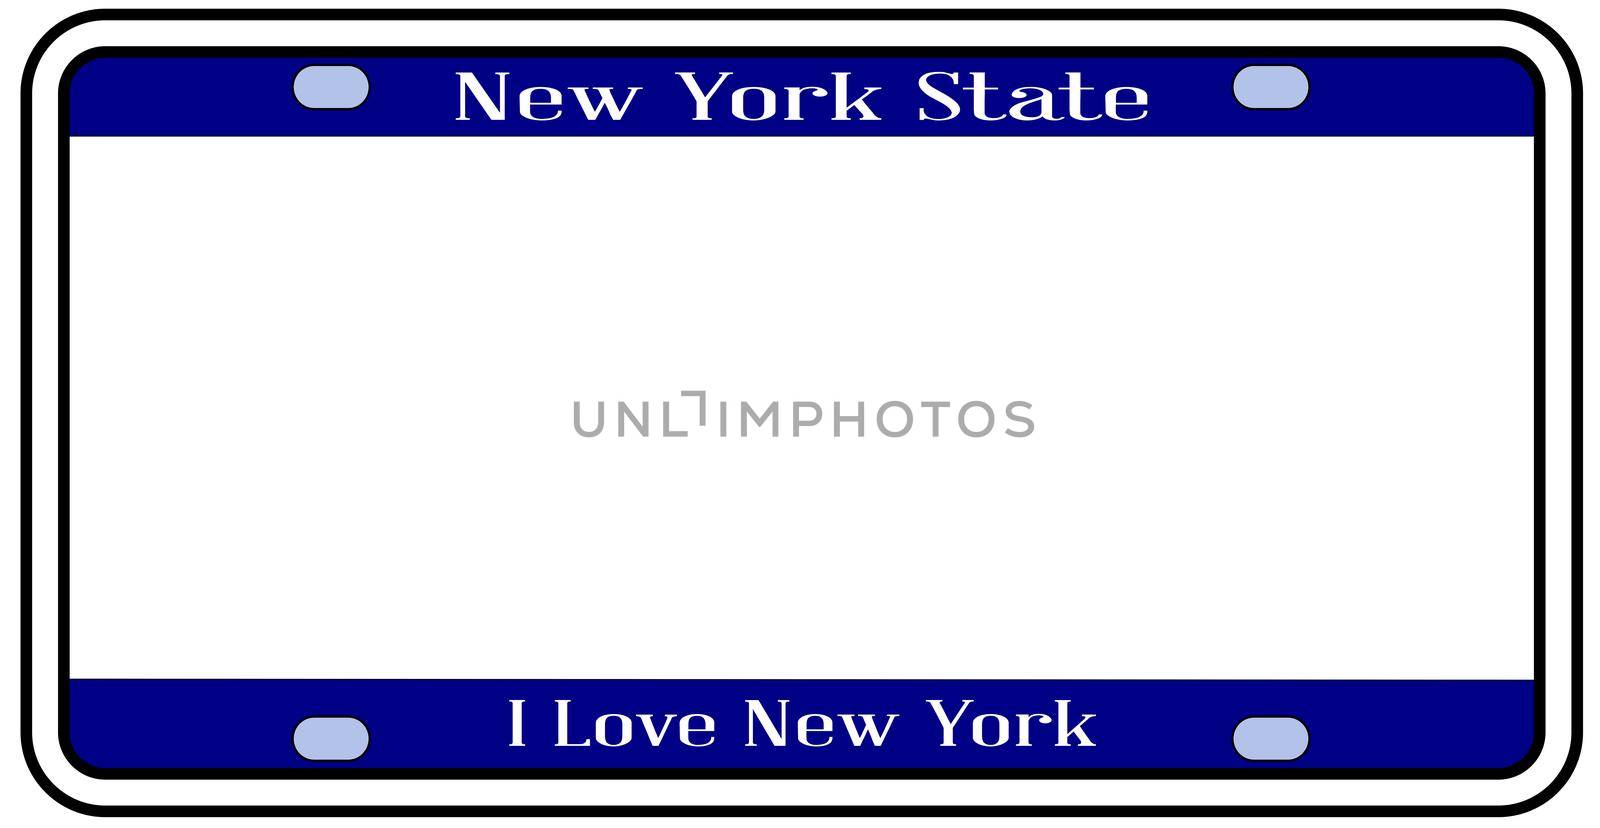 New York state license plate in the colors of the state flag over a white background